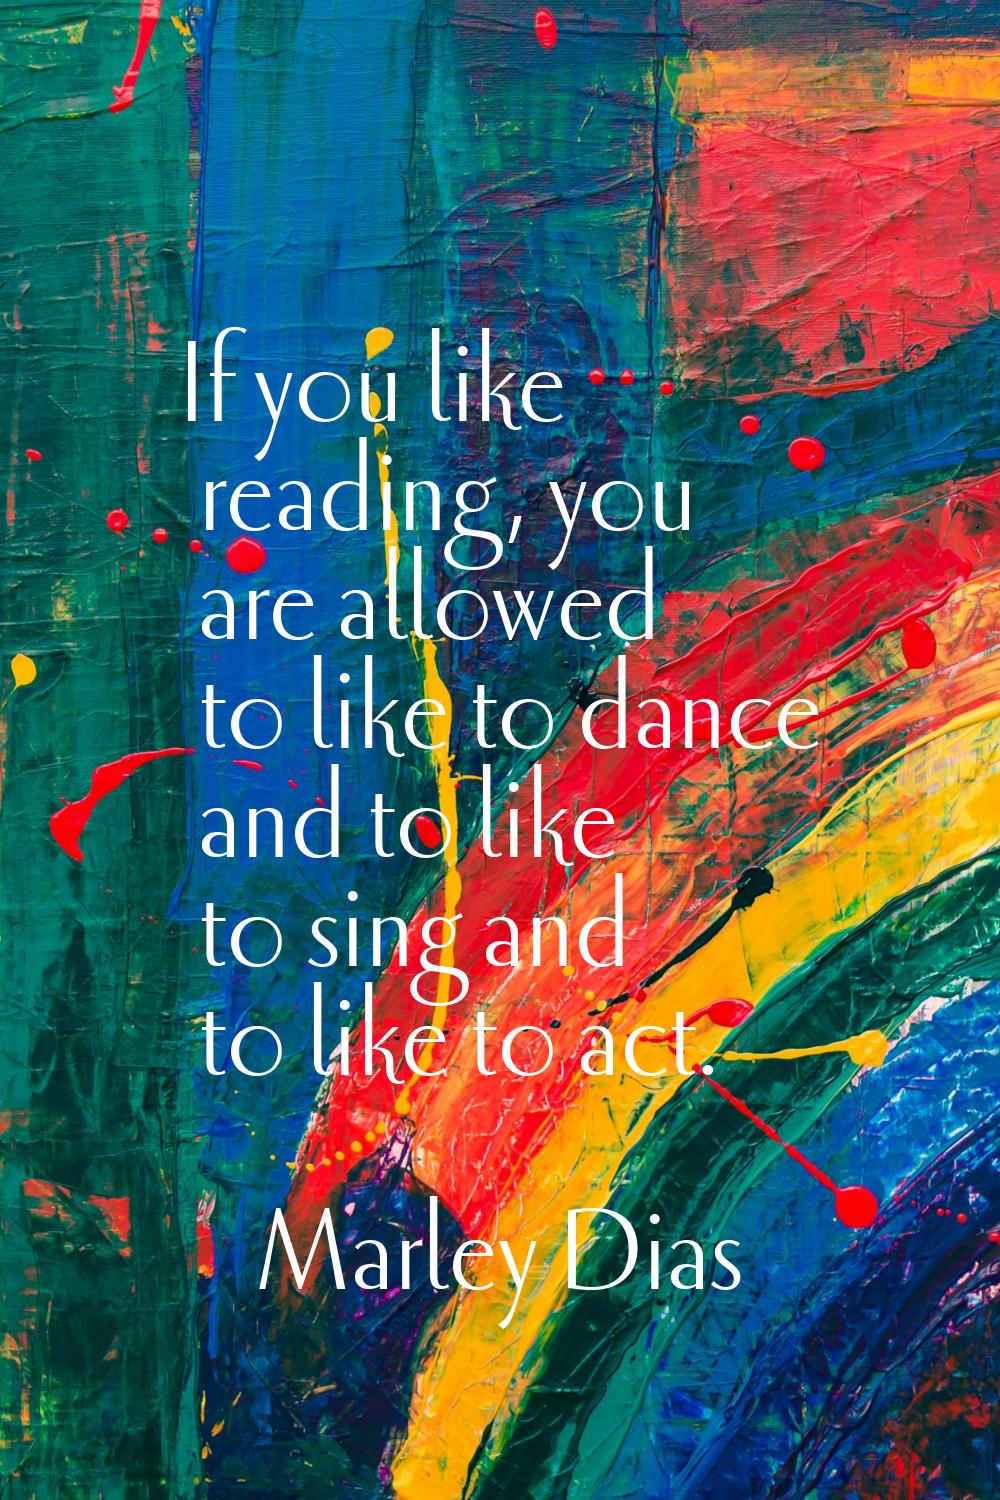 If you like reading, you are allowed to like to dance and to like to sing and to like to act.